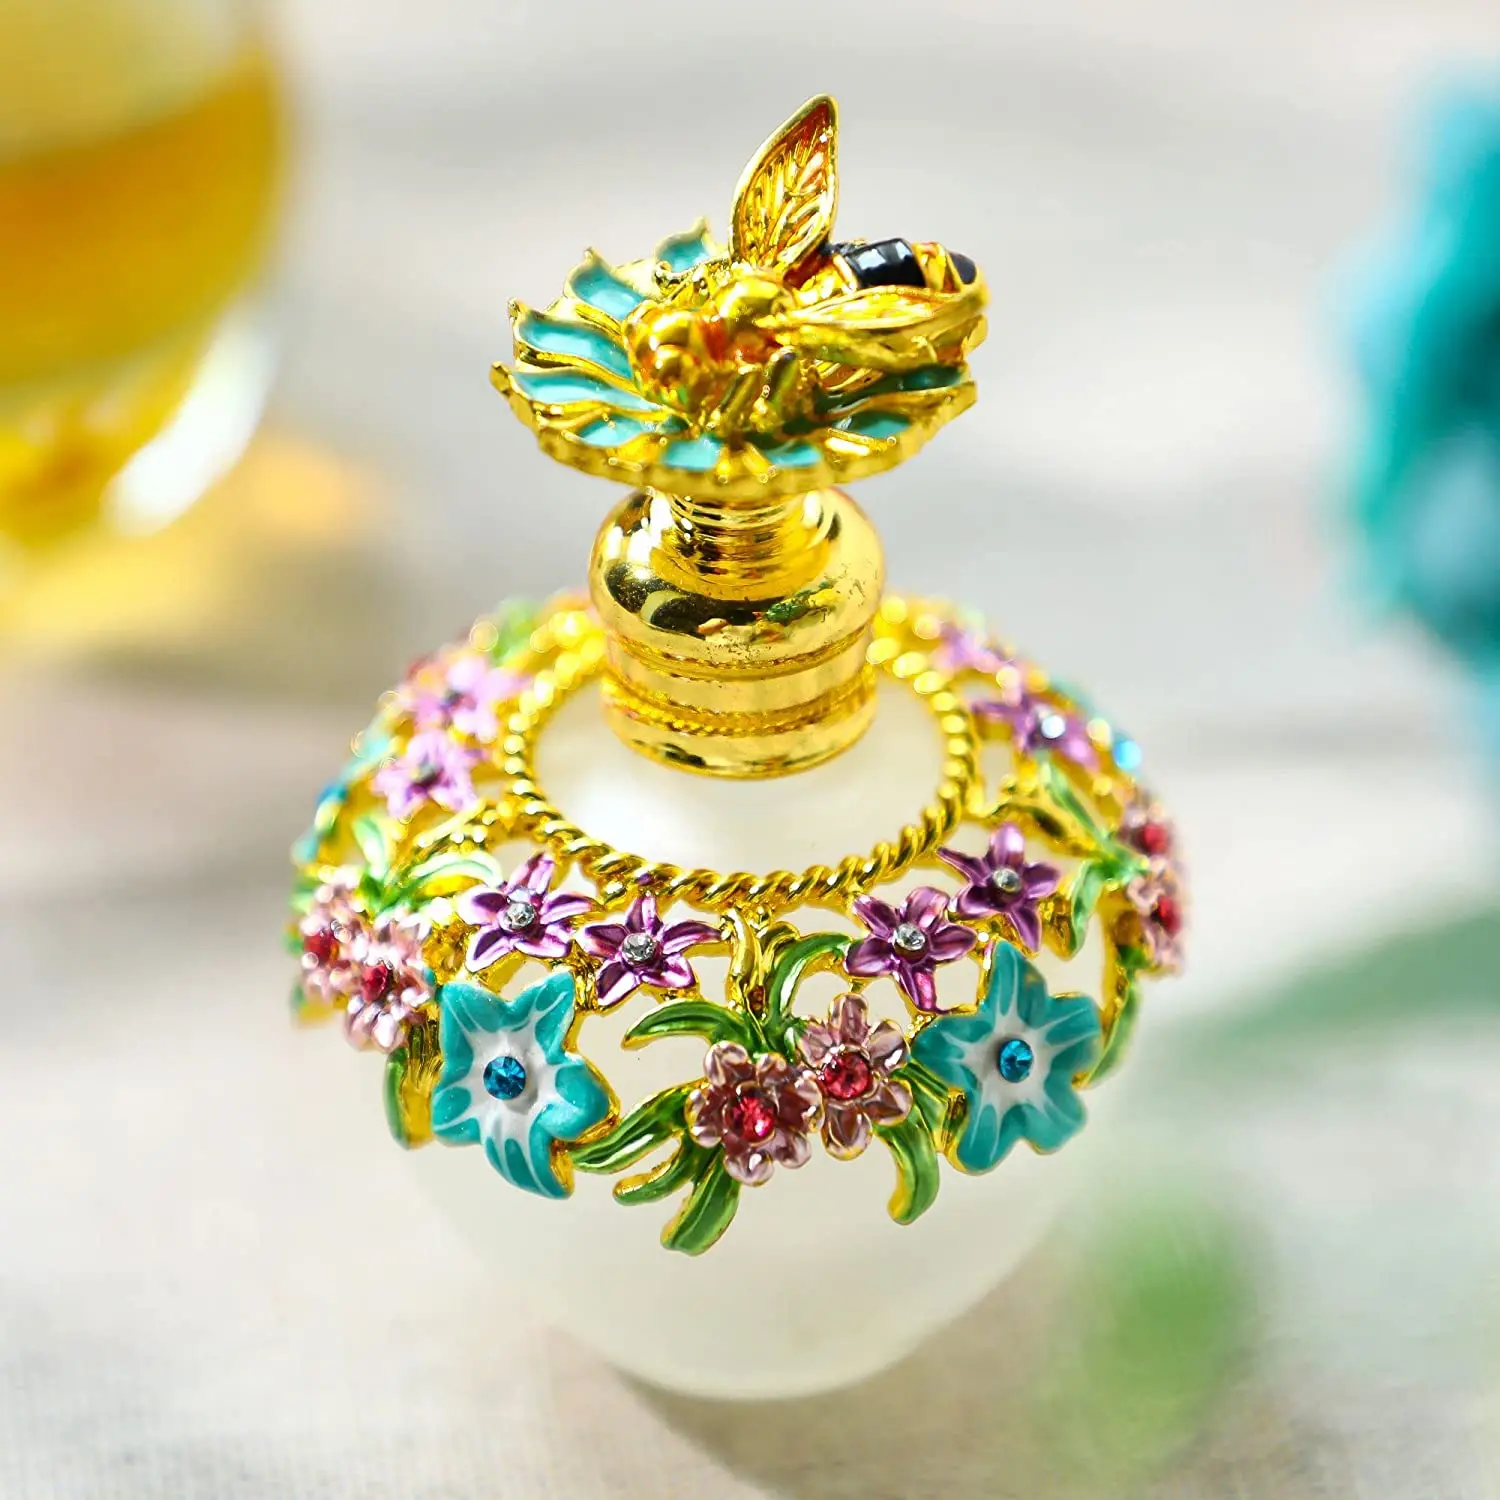 H&D Fancy Glass Perfume Bottle Empty with Flowers Bee Charm Decorative Vintage Crystal Perfume Decanter(Golden,40ML) 1 set of standing empty calendar blank calendar decorative calendar desktop diy calendar